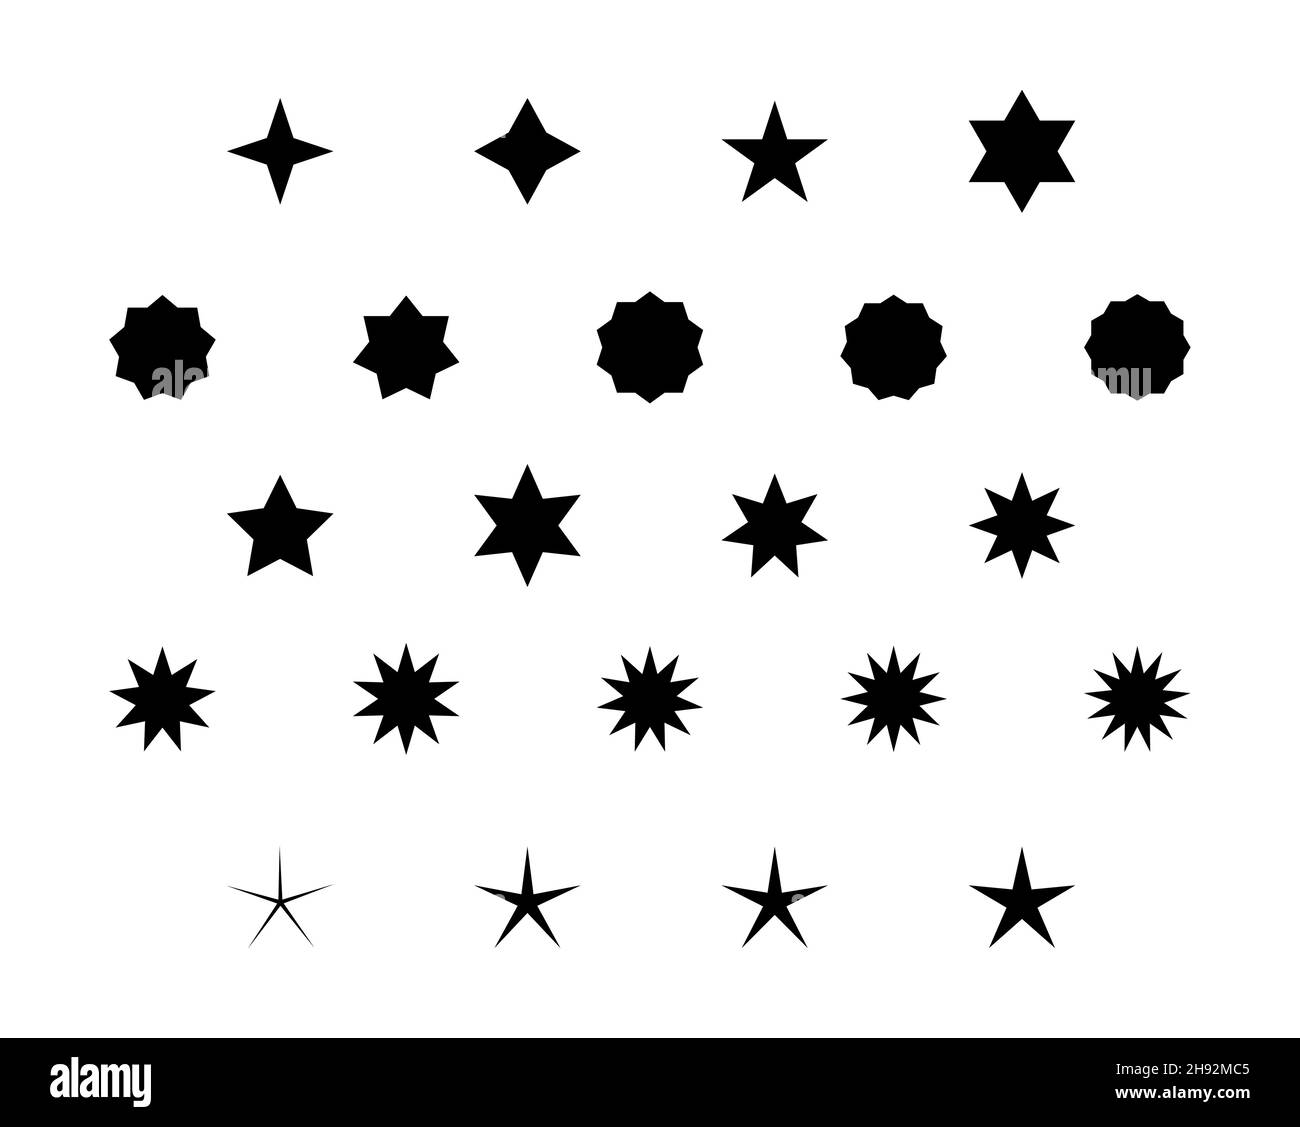 Black star shapes on a white background. Star icons. Star symbols. Stock Vector